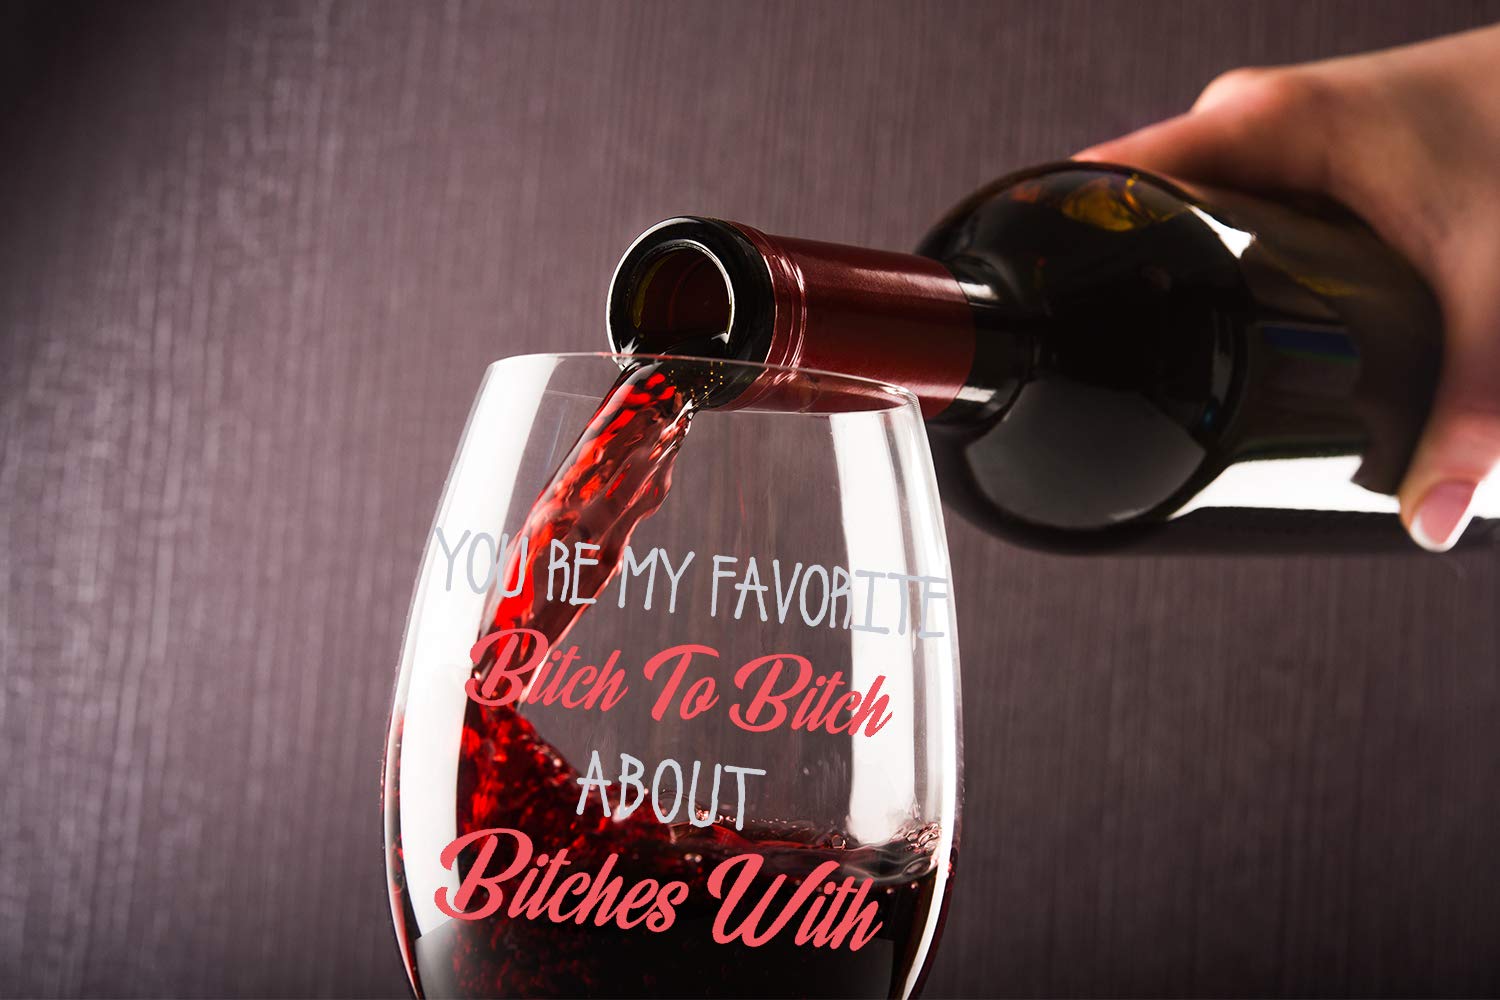 Your my Favorite Bitch to Bitch About Bitches with Funny 15oz Stemless Crystal Wine Glass - Fun Wine Glasses with Sayings Gifts for Women